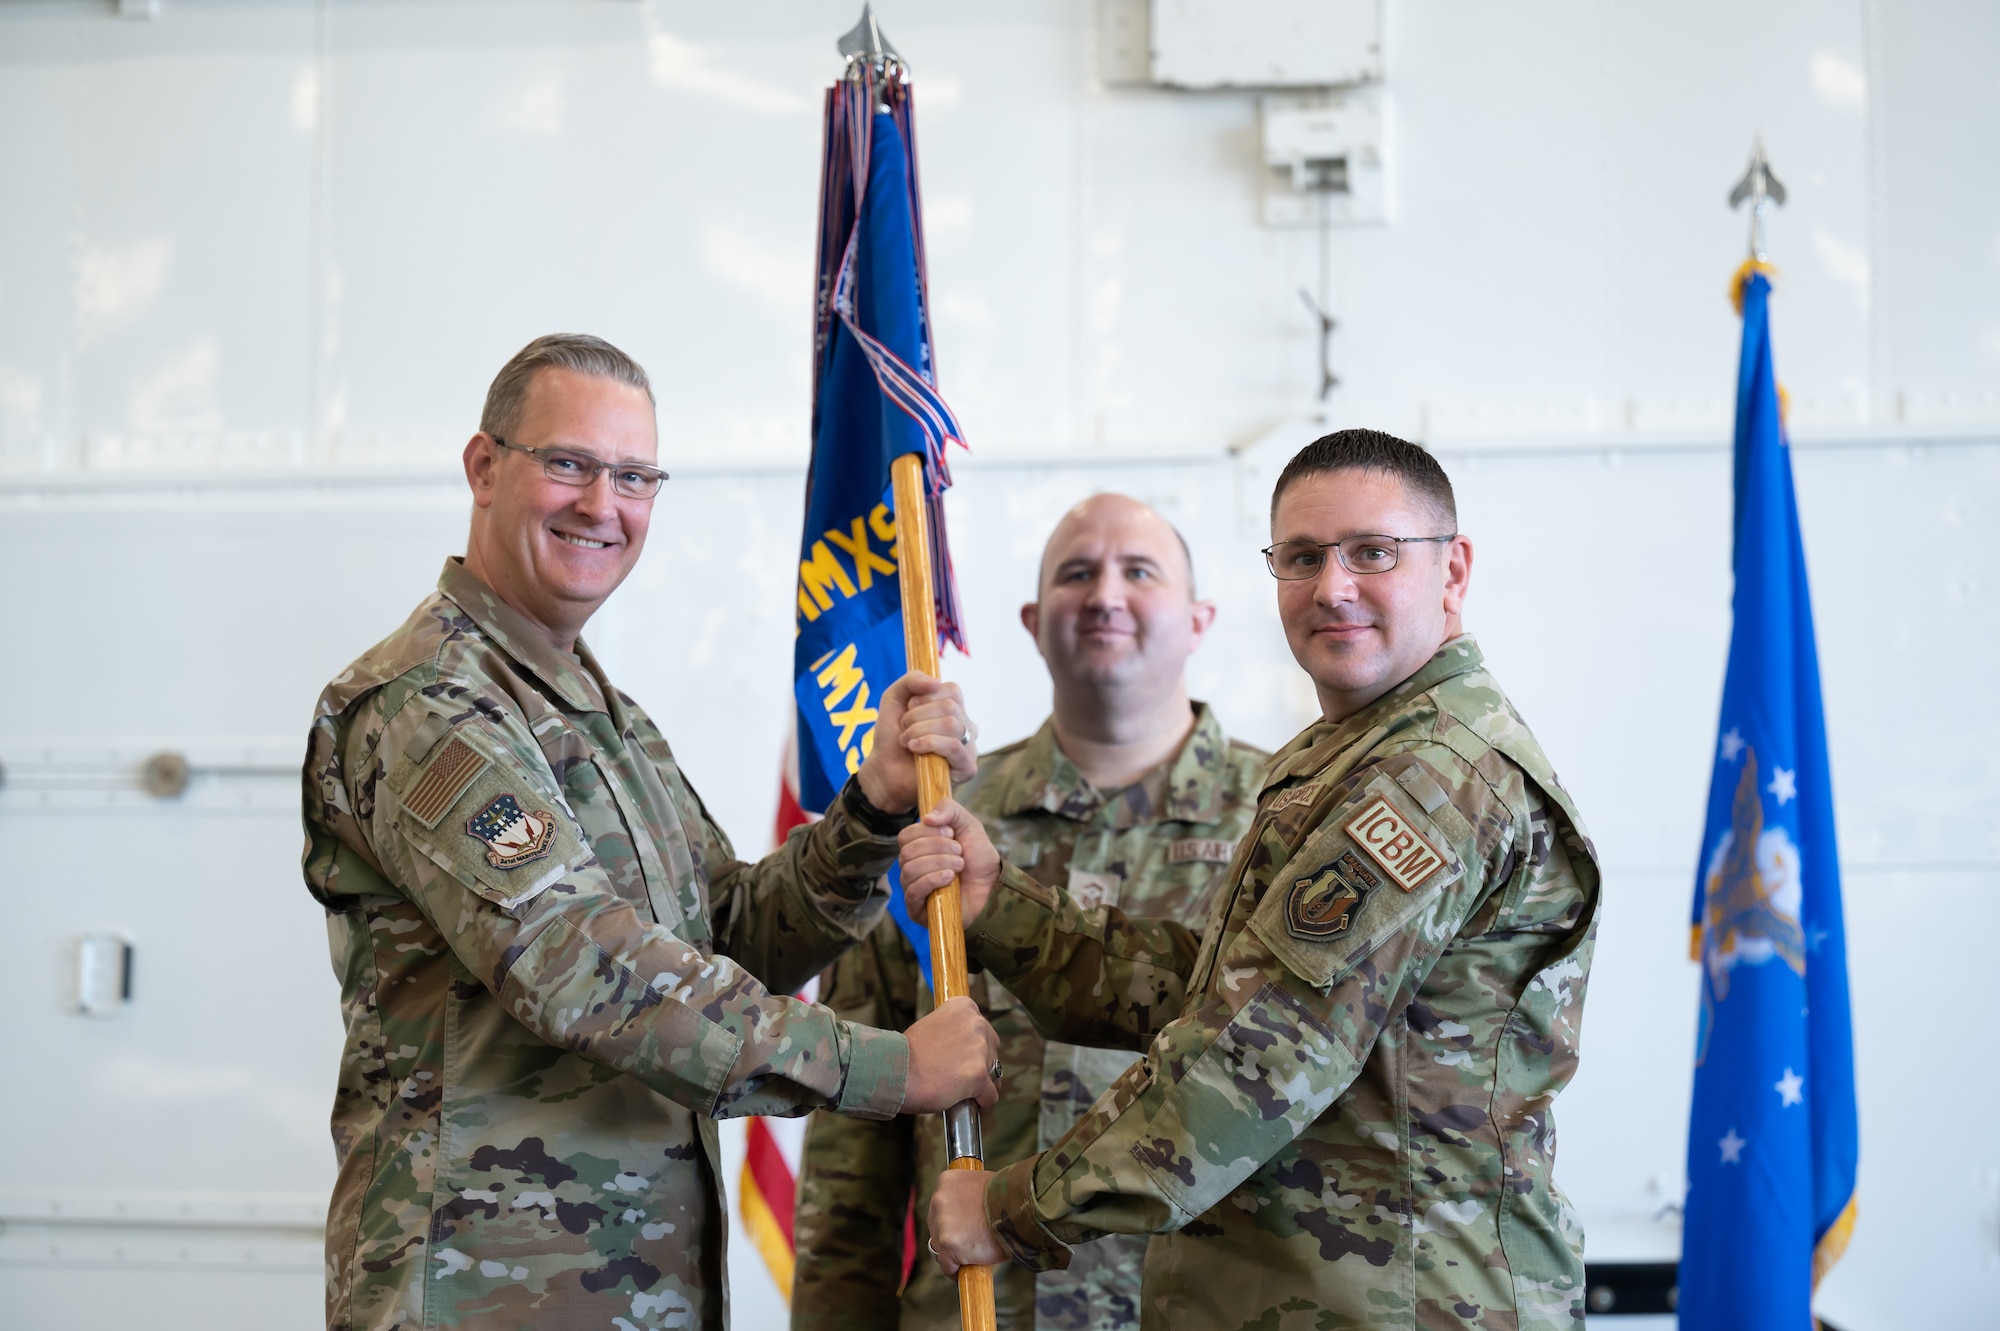 Maj. Daniel Foster, right, accepts command of the 341st Missile Maintenance Squadron from Col. Kenneth Benton, left, 341st Maintenance Group commander, while Senior Master Sgt. Brian Brown, 341st MMXS first sergeant, looks on, during a change of command ceremony June 24, 2022, at Malmstrom Air Force Base, Mont.